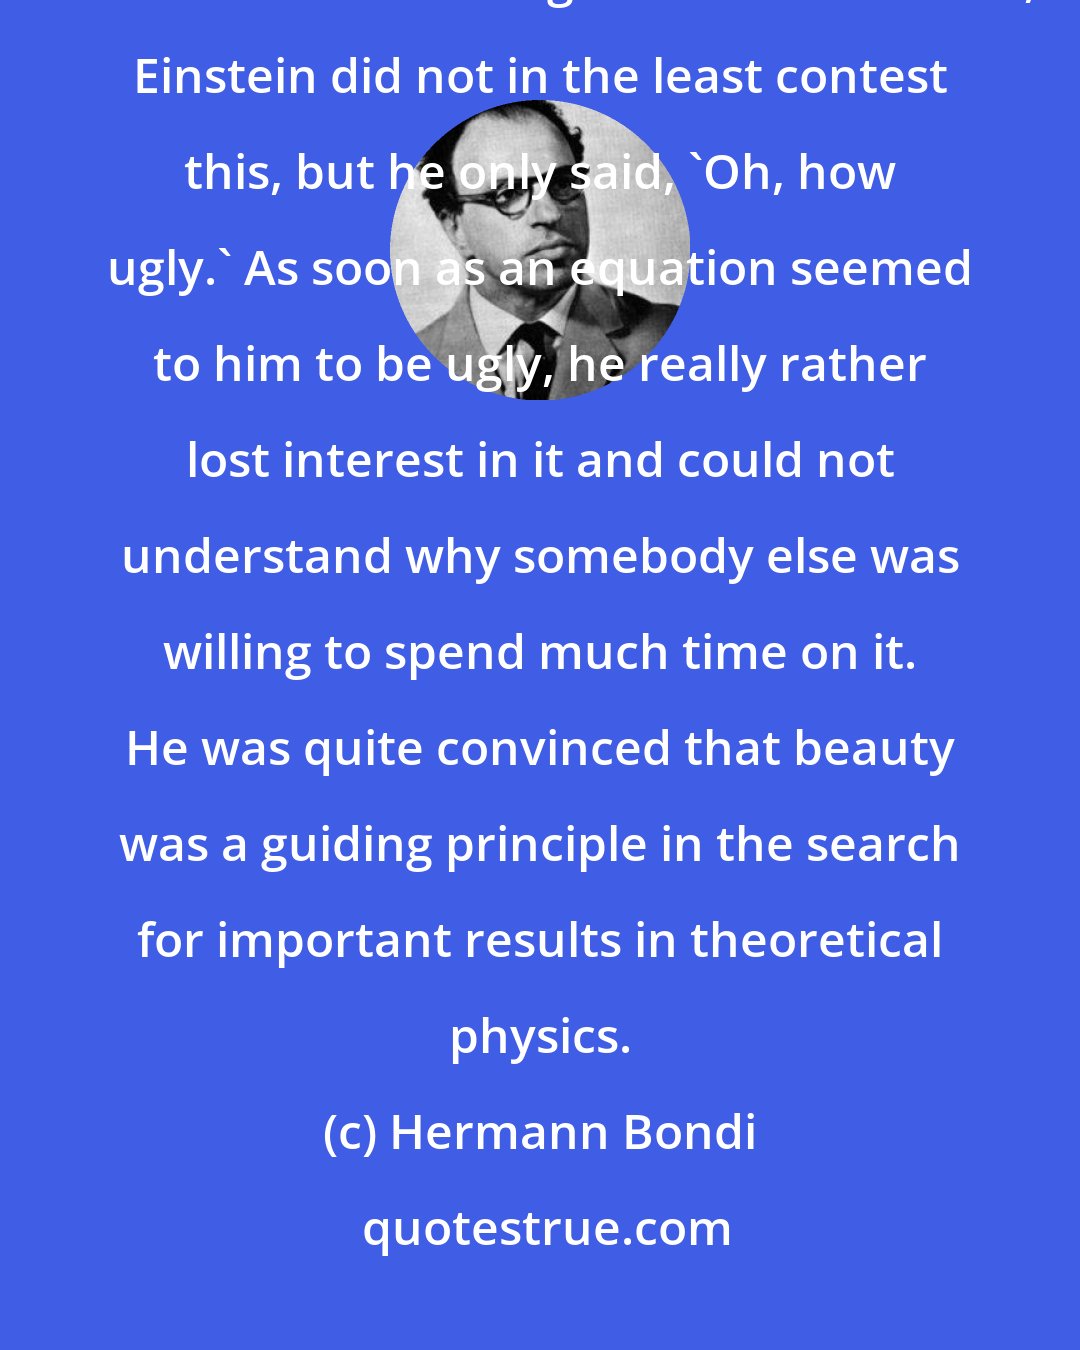 Hermann Bondi: What I remember most clearly was that when I put down a suggestion that seemed to me cogent and reasonable, Einstein did not in the least contest this, but he only said, 'Oh, how ugly.' As soon as an equation seemed to him to be ugly, he really rather lost interest in it and could not understand why somebody else was willing to spend much time on it. He was quite convinced that beauty was a guiding principle in the search for important results in theoretical physics.